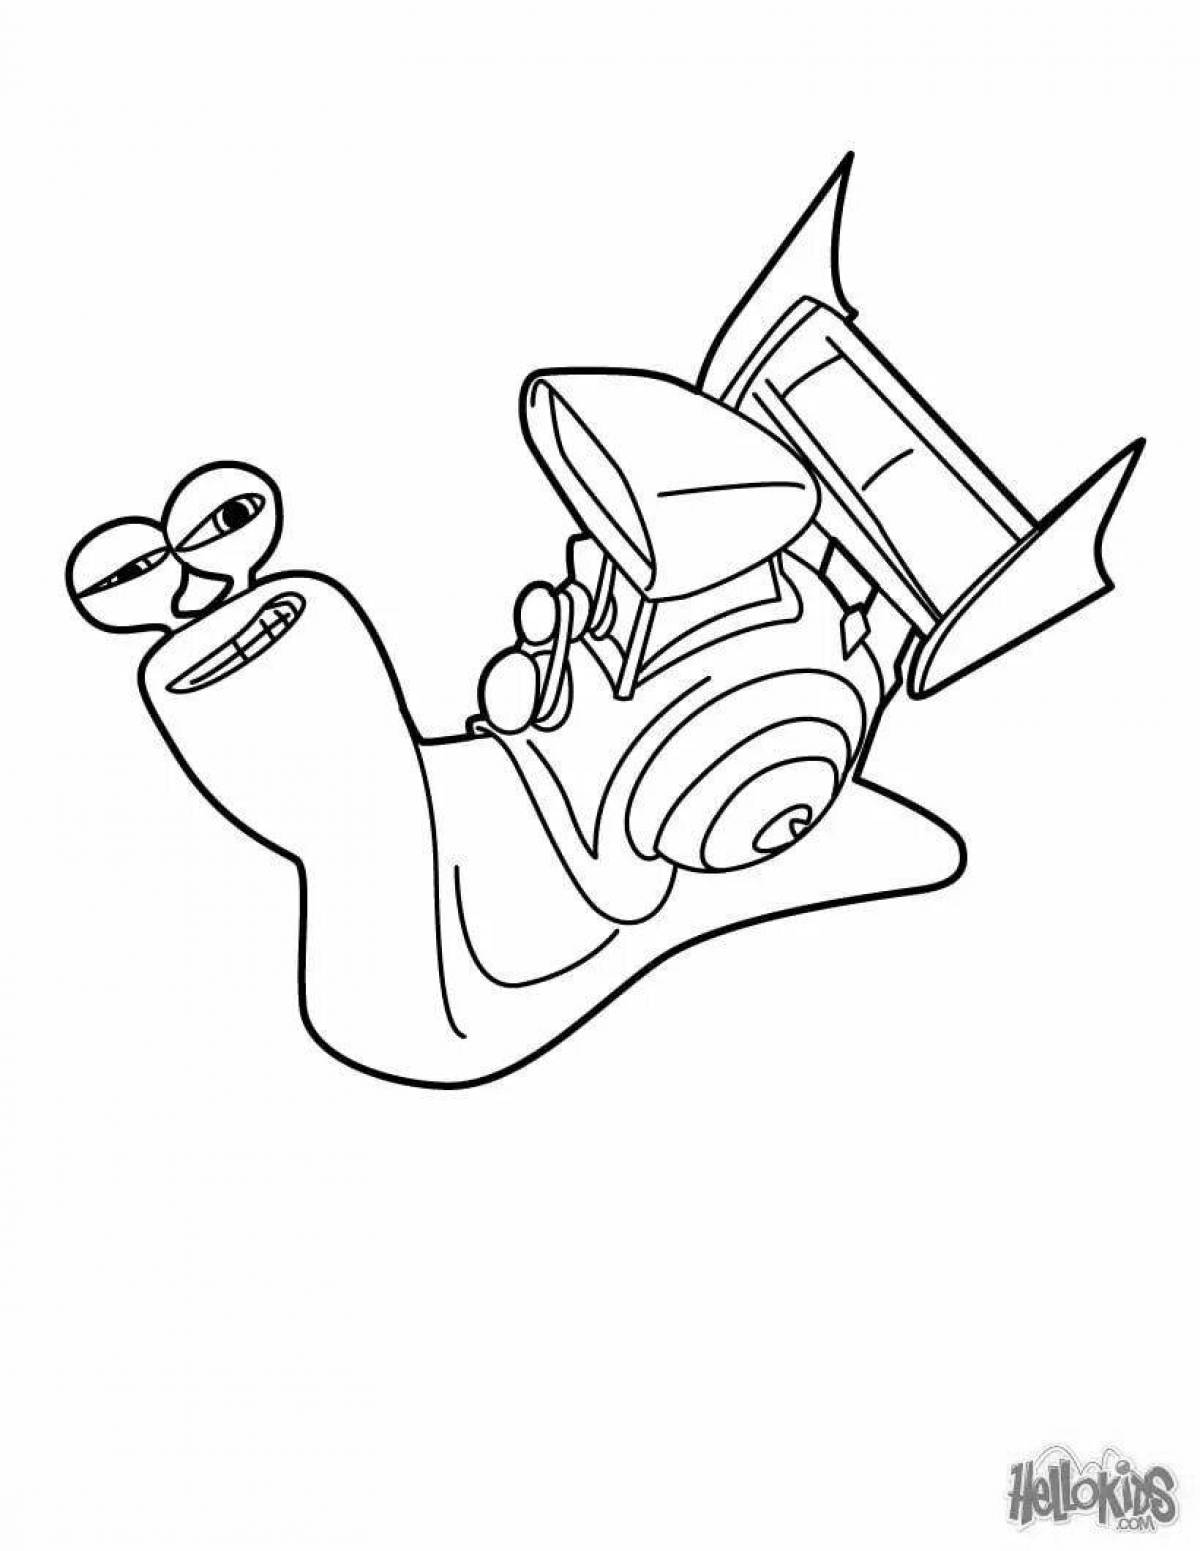 Turbo snail cute coloring page